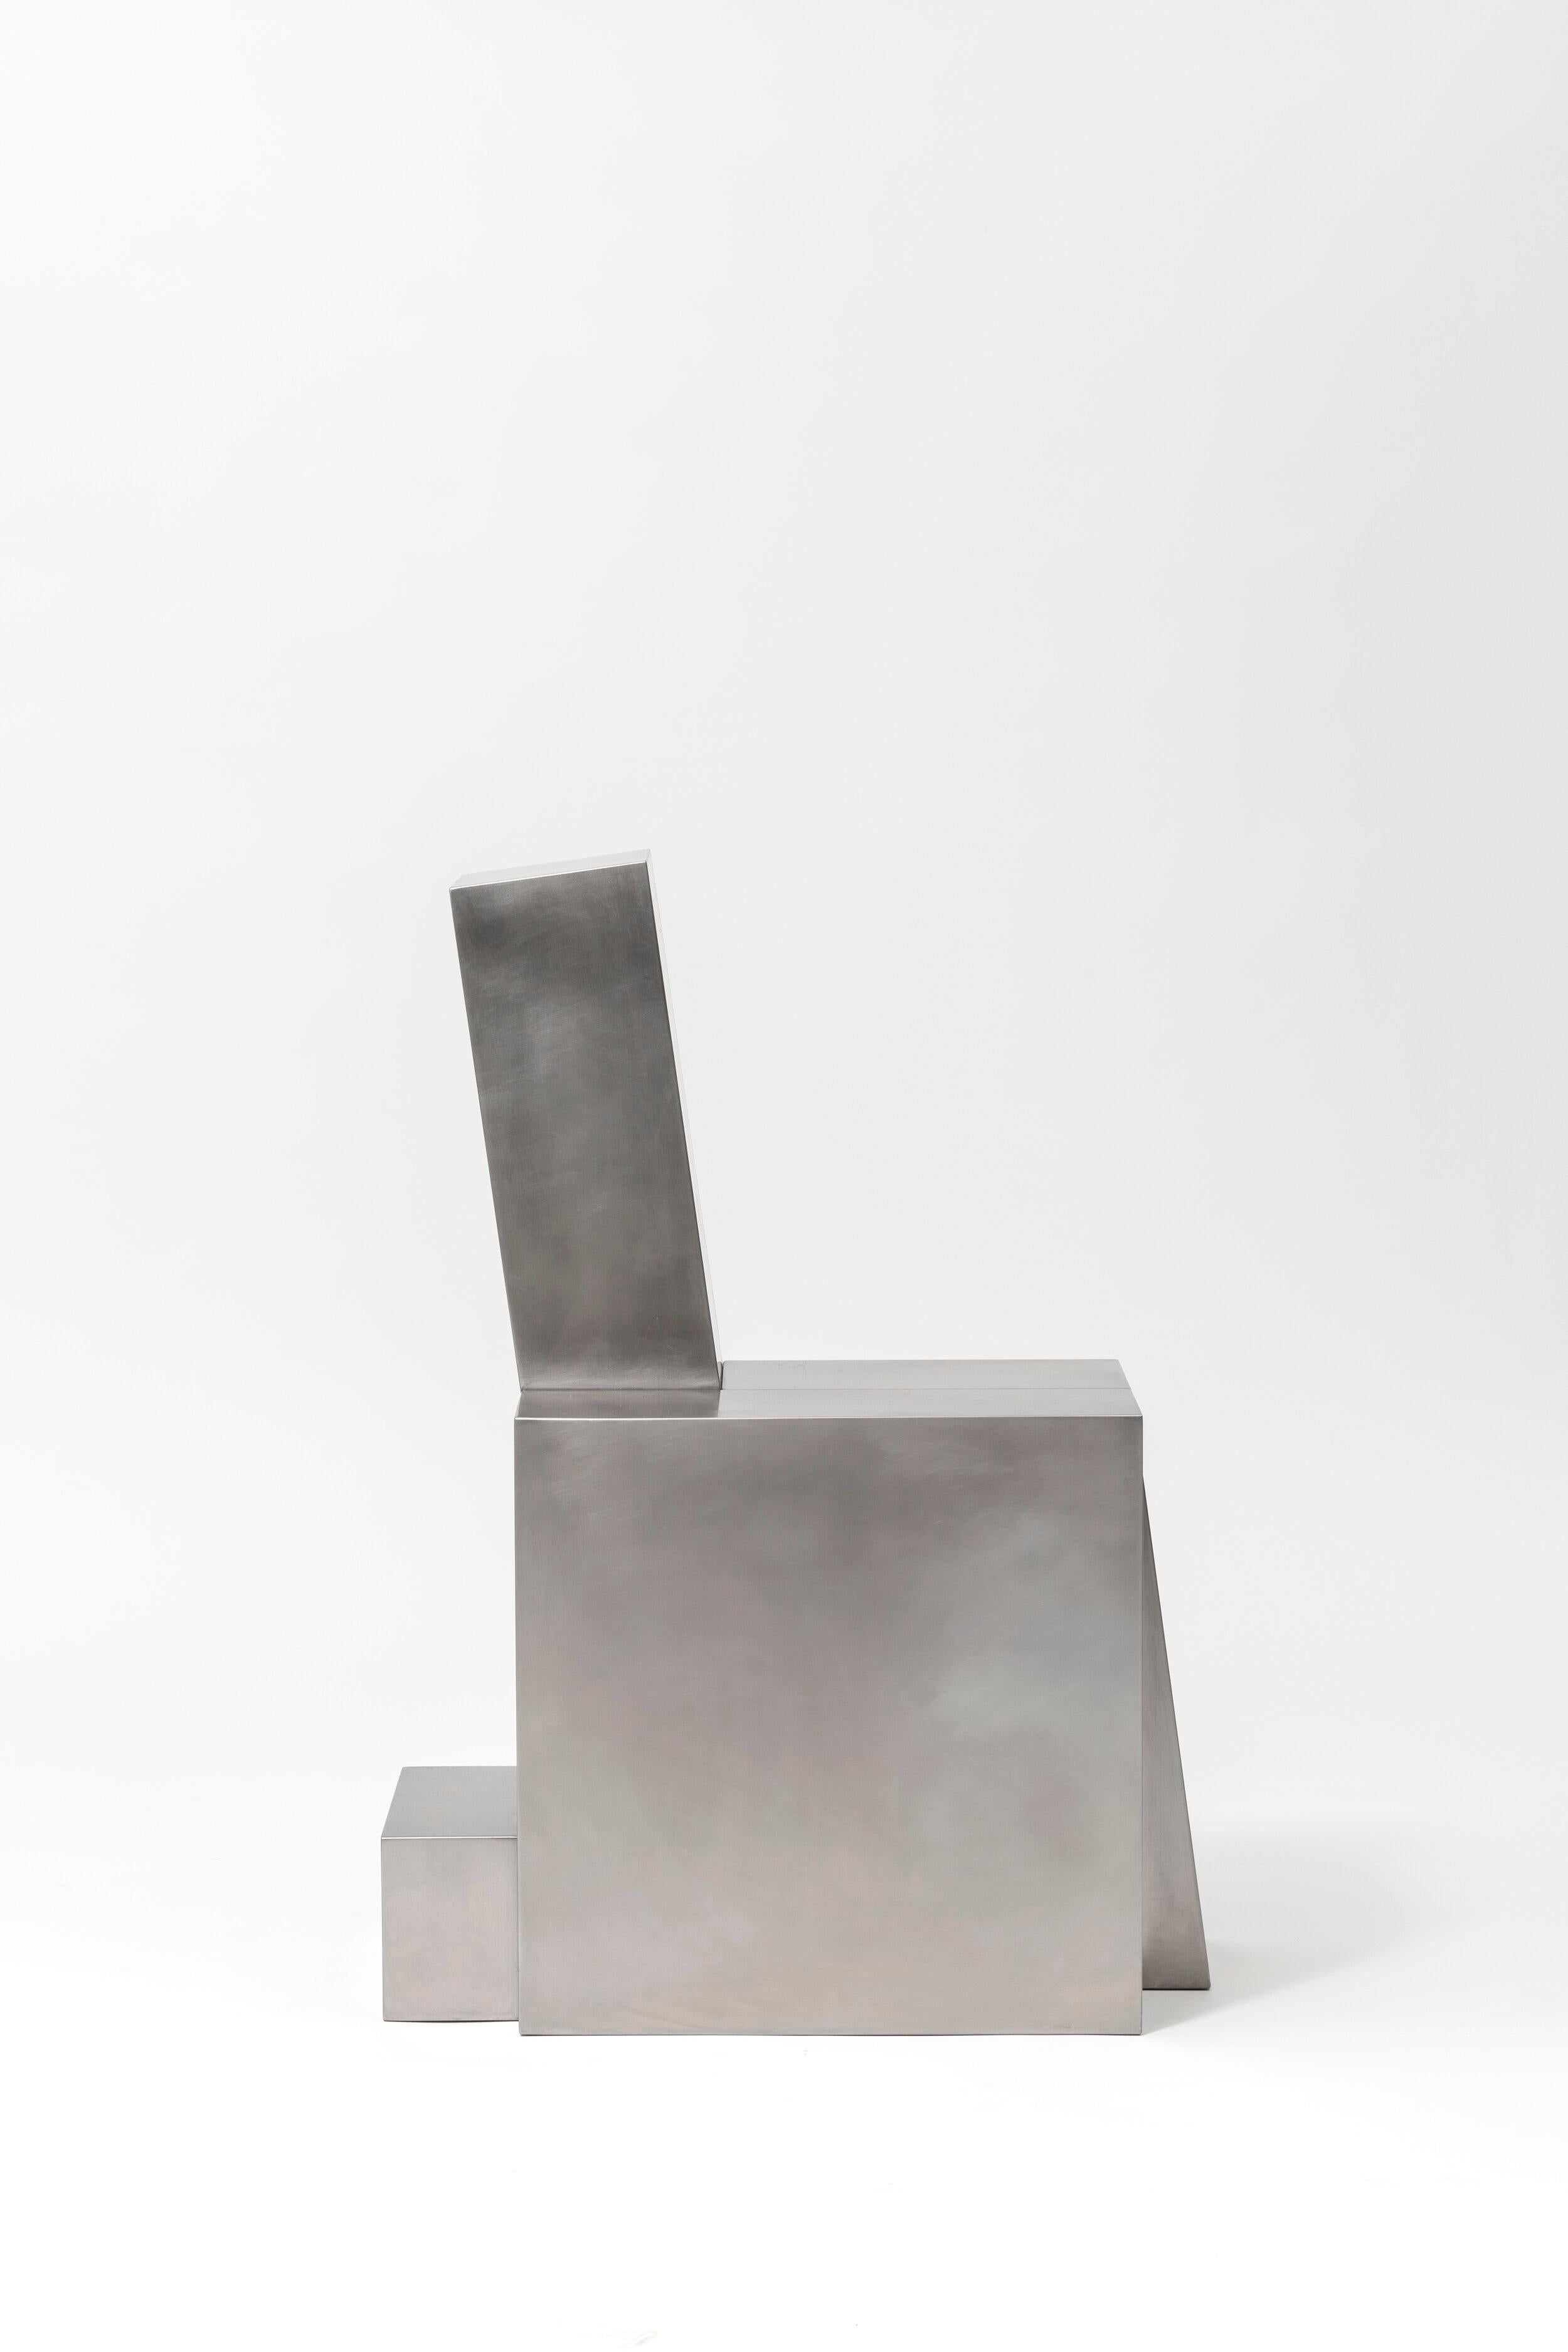 Other Layered Steel Seat XV by Hyungshin Hwang For Sale